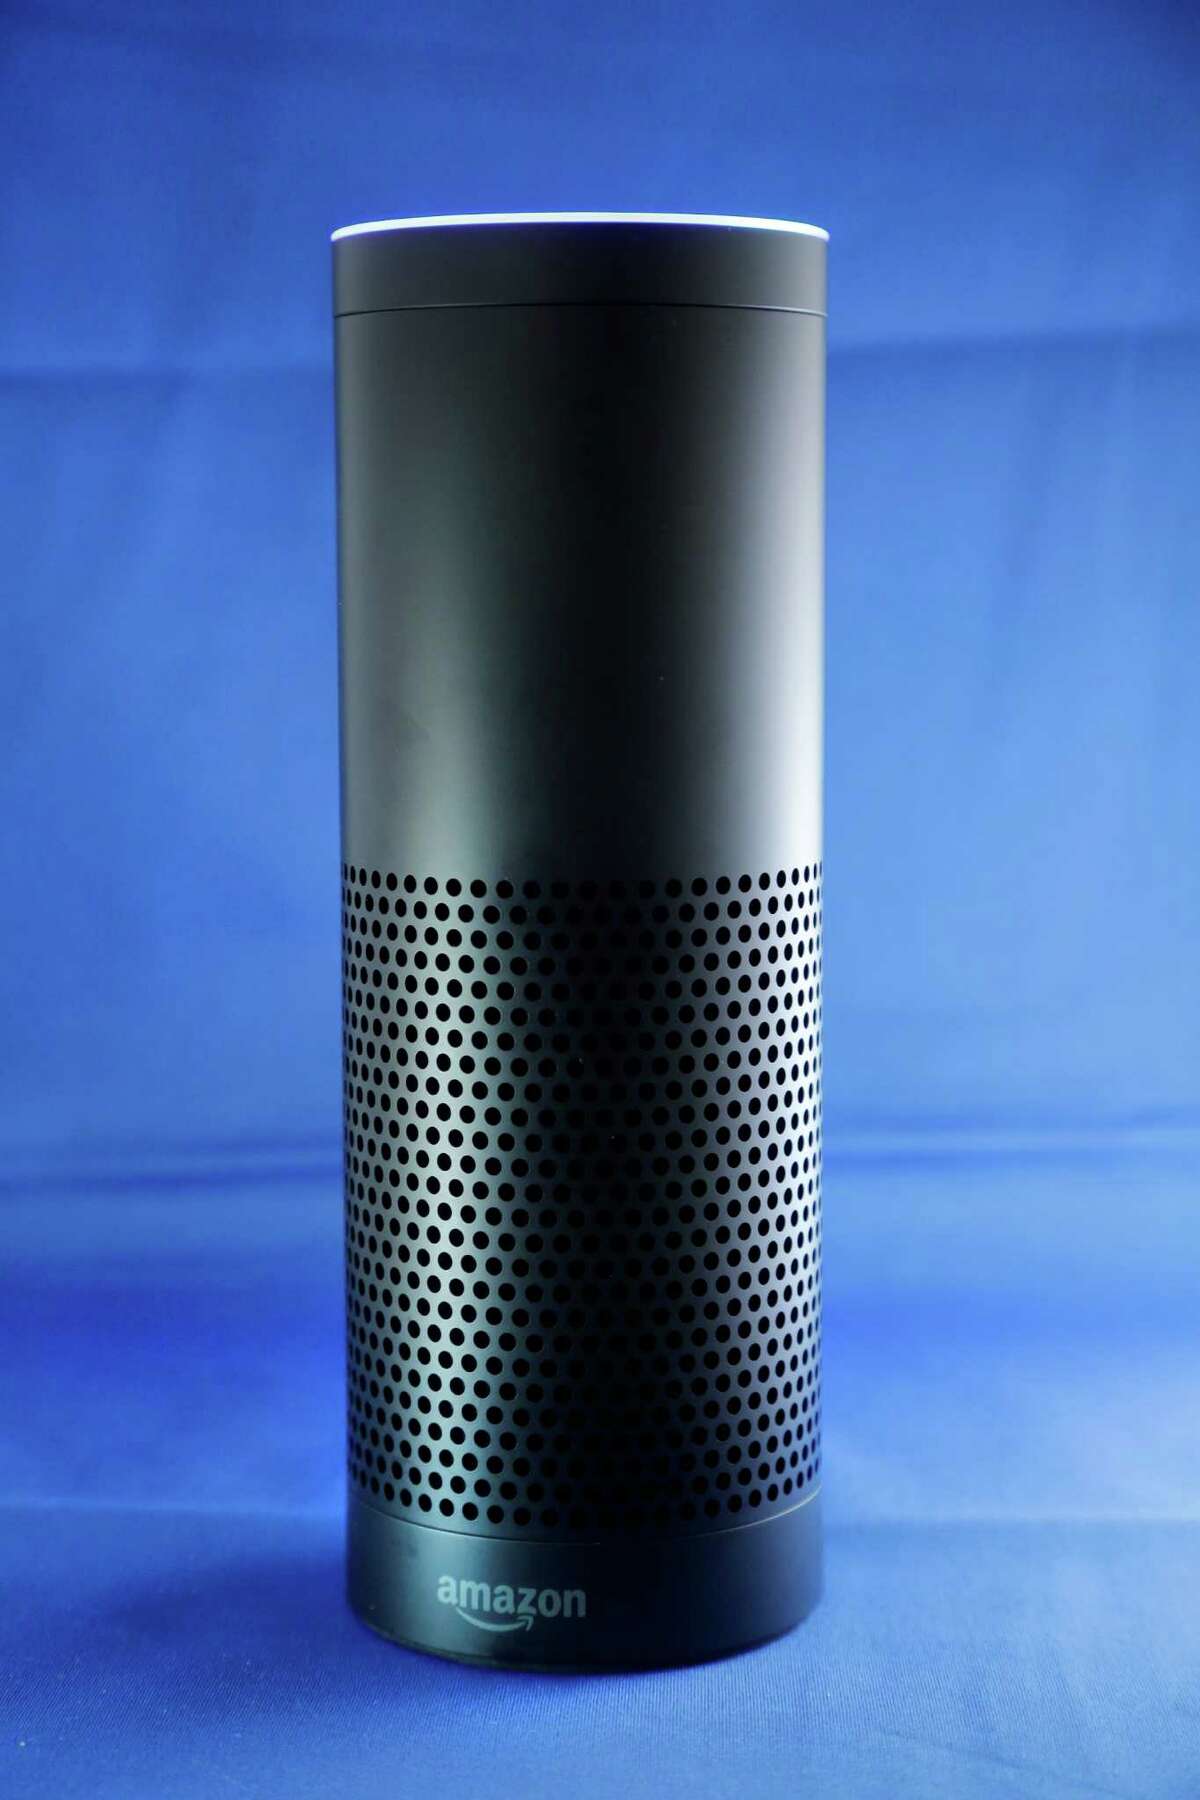 Amazon's Echo, a digital assistant that can be set up in a home or office to listen for various requests, such as for a song, a sports score, the weather, or even a book to be read aloud. (AP Photo/Mark Lennihan)